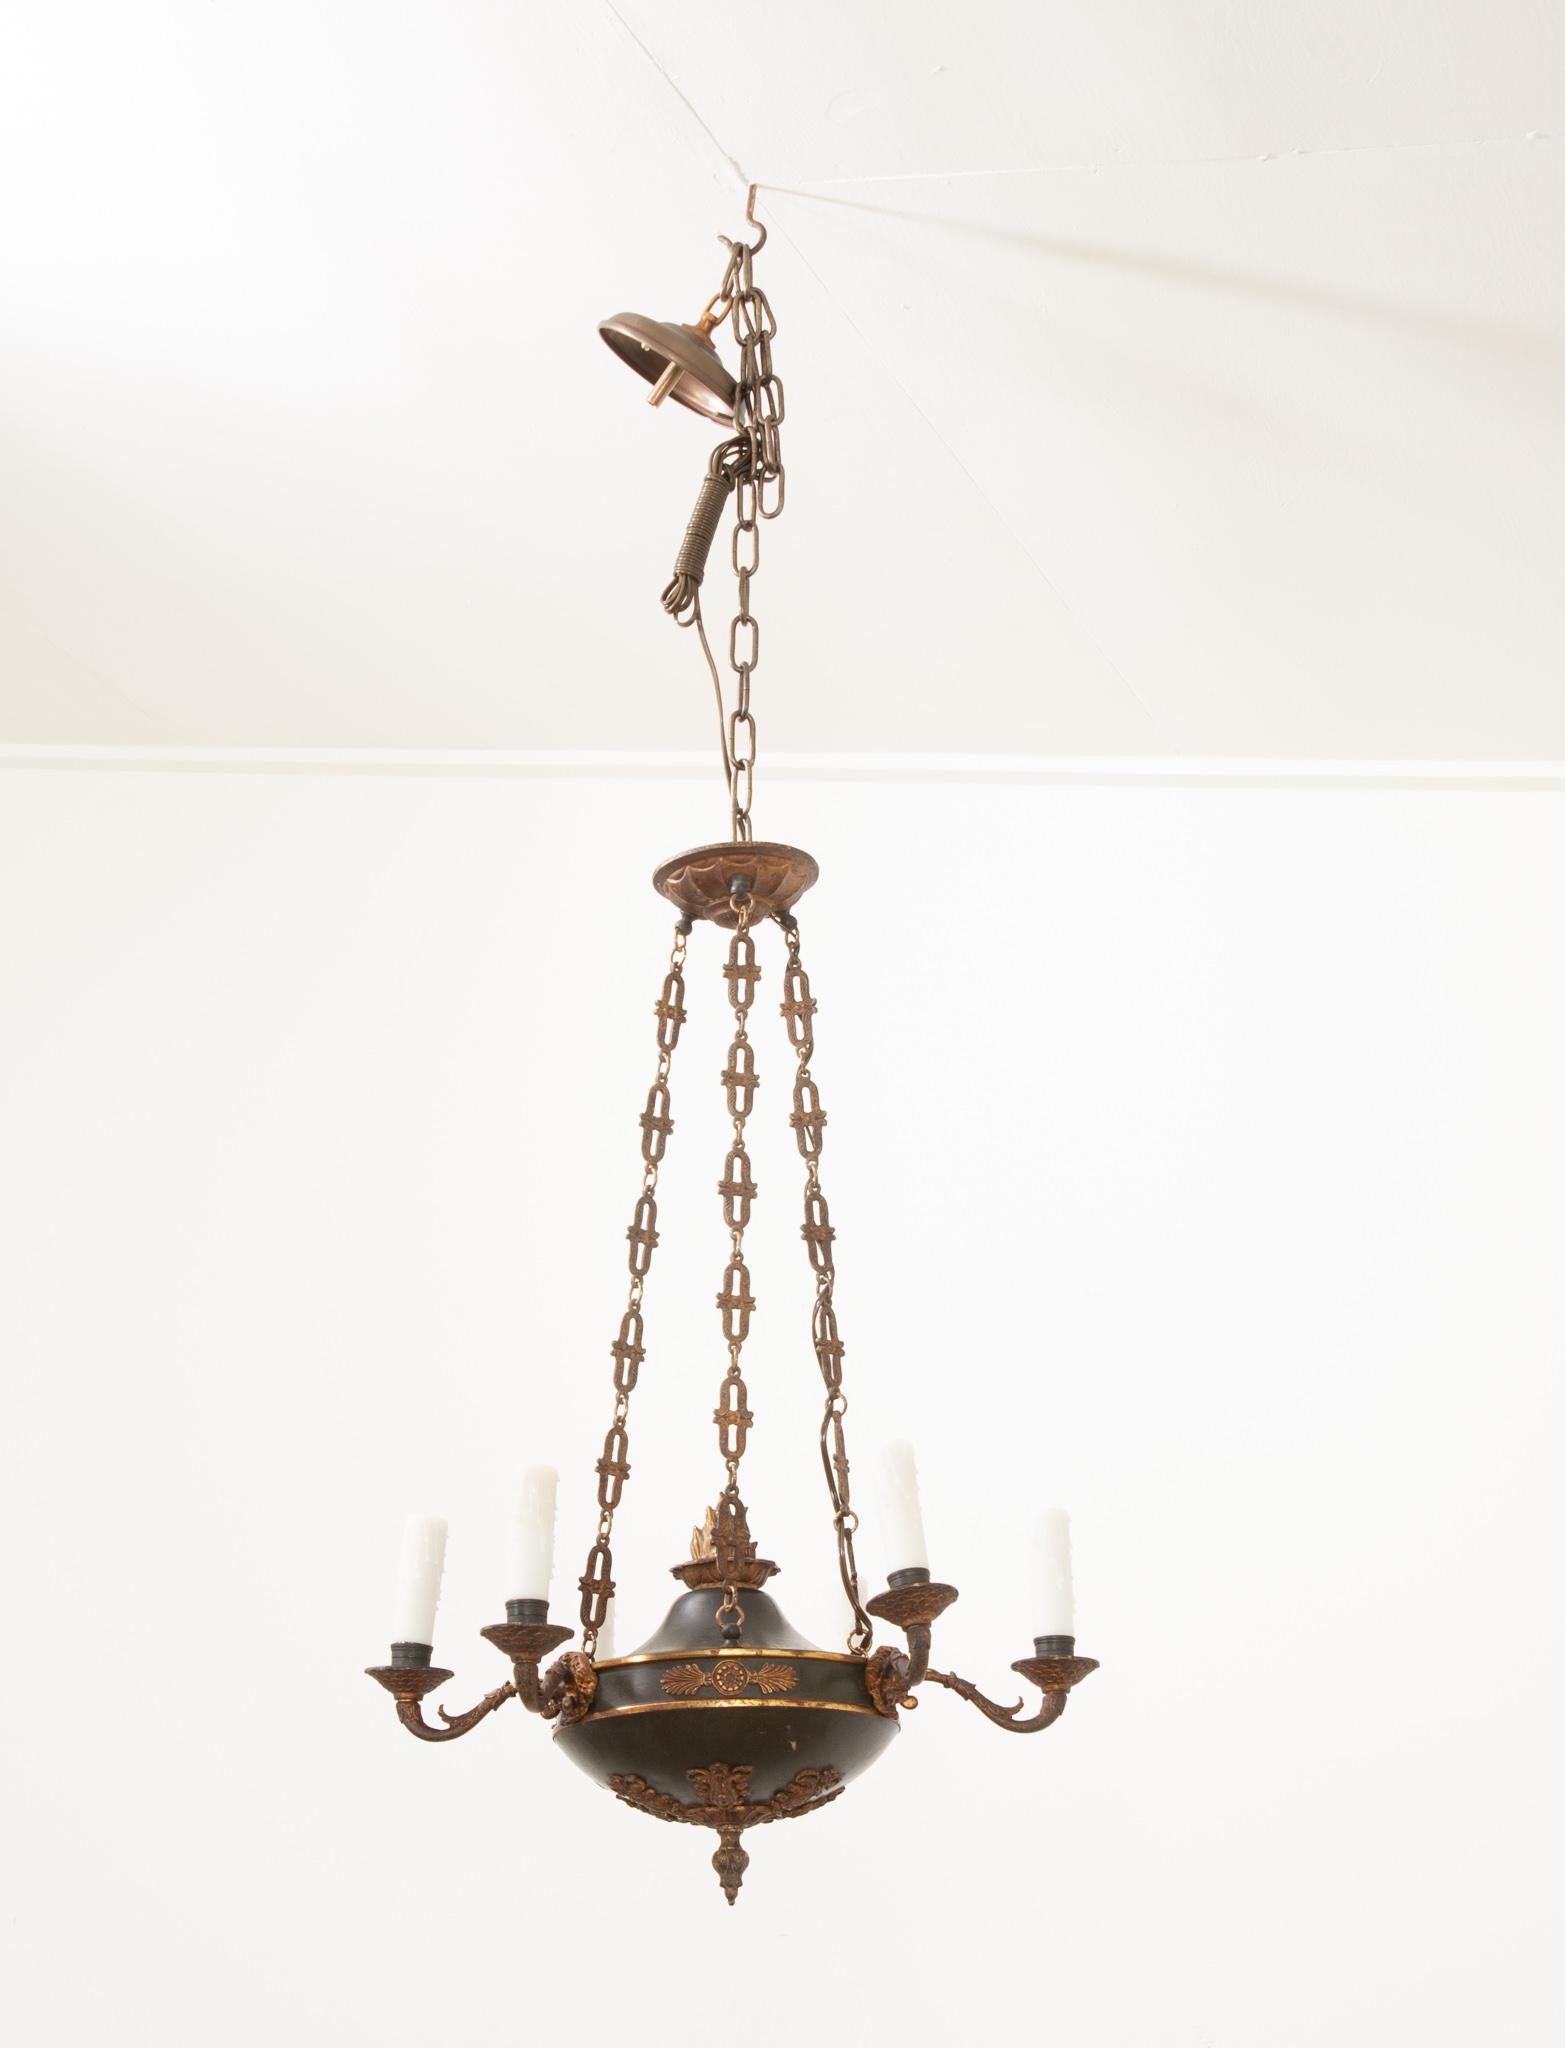 This Empirically styled six arm chandelier is just as artful as it is functional. Black tole and patinated brass contrast each other wonderfully. The underside of the bowl features stylized floral ormolu and a decorative final. The arms protrude